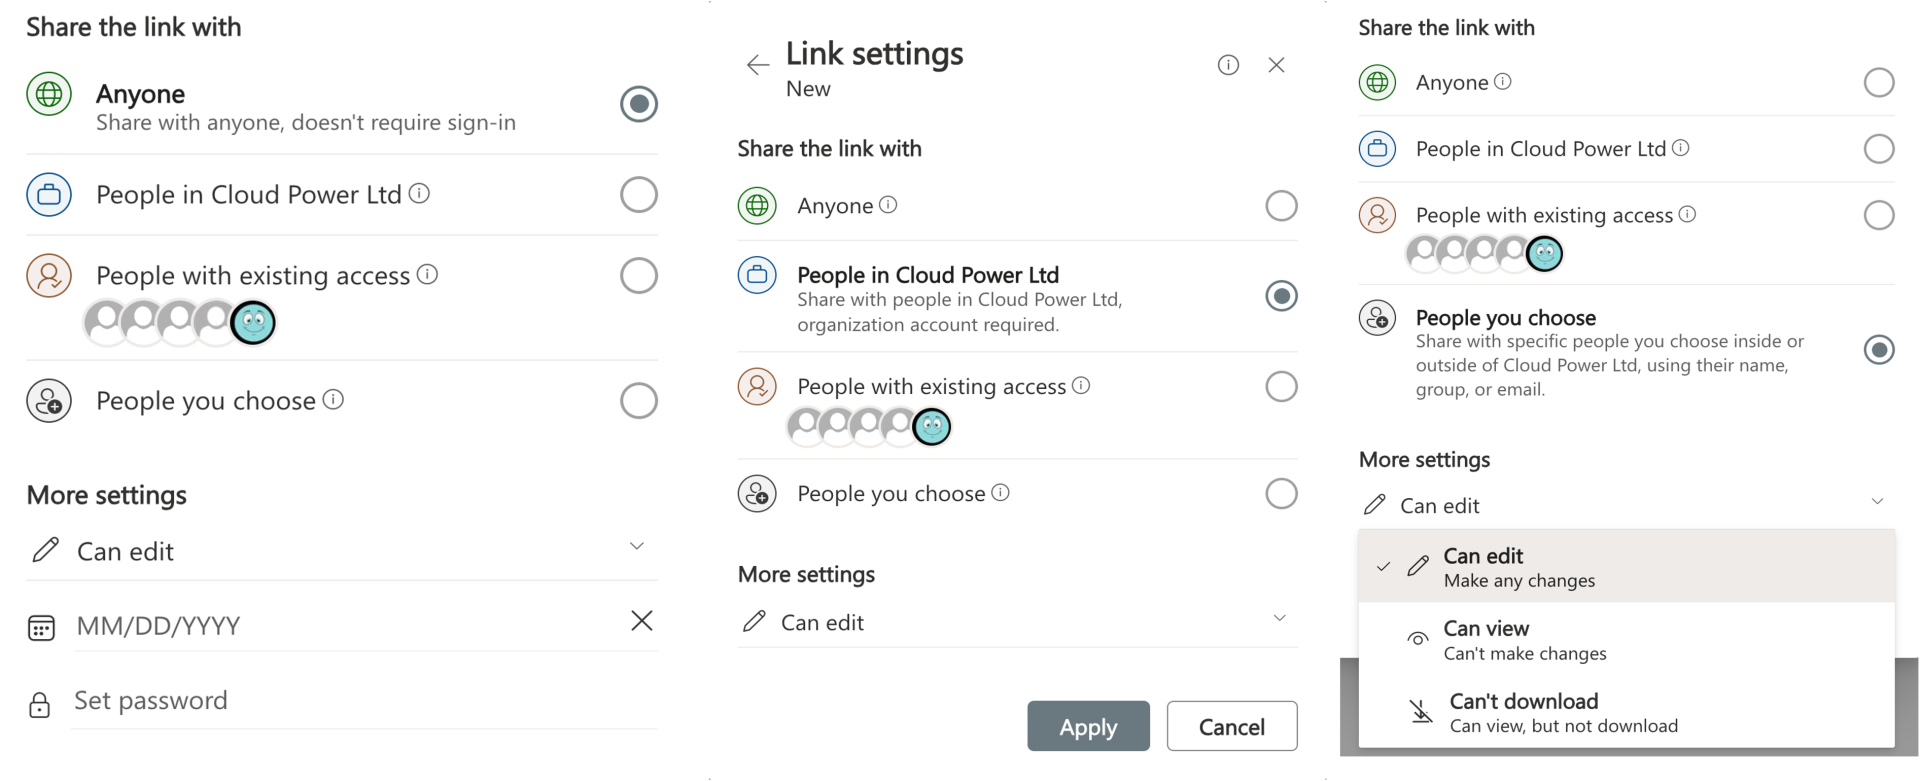 Sharing options for a link created for a SharePoint file or folder